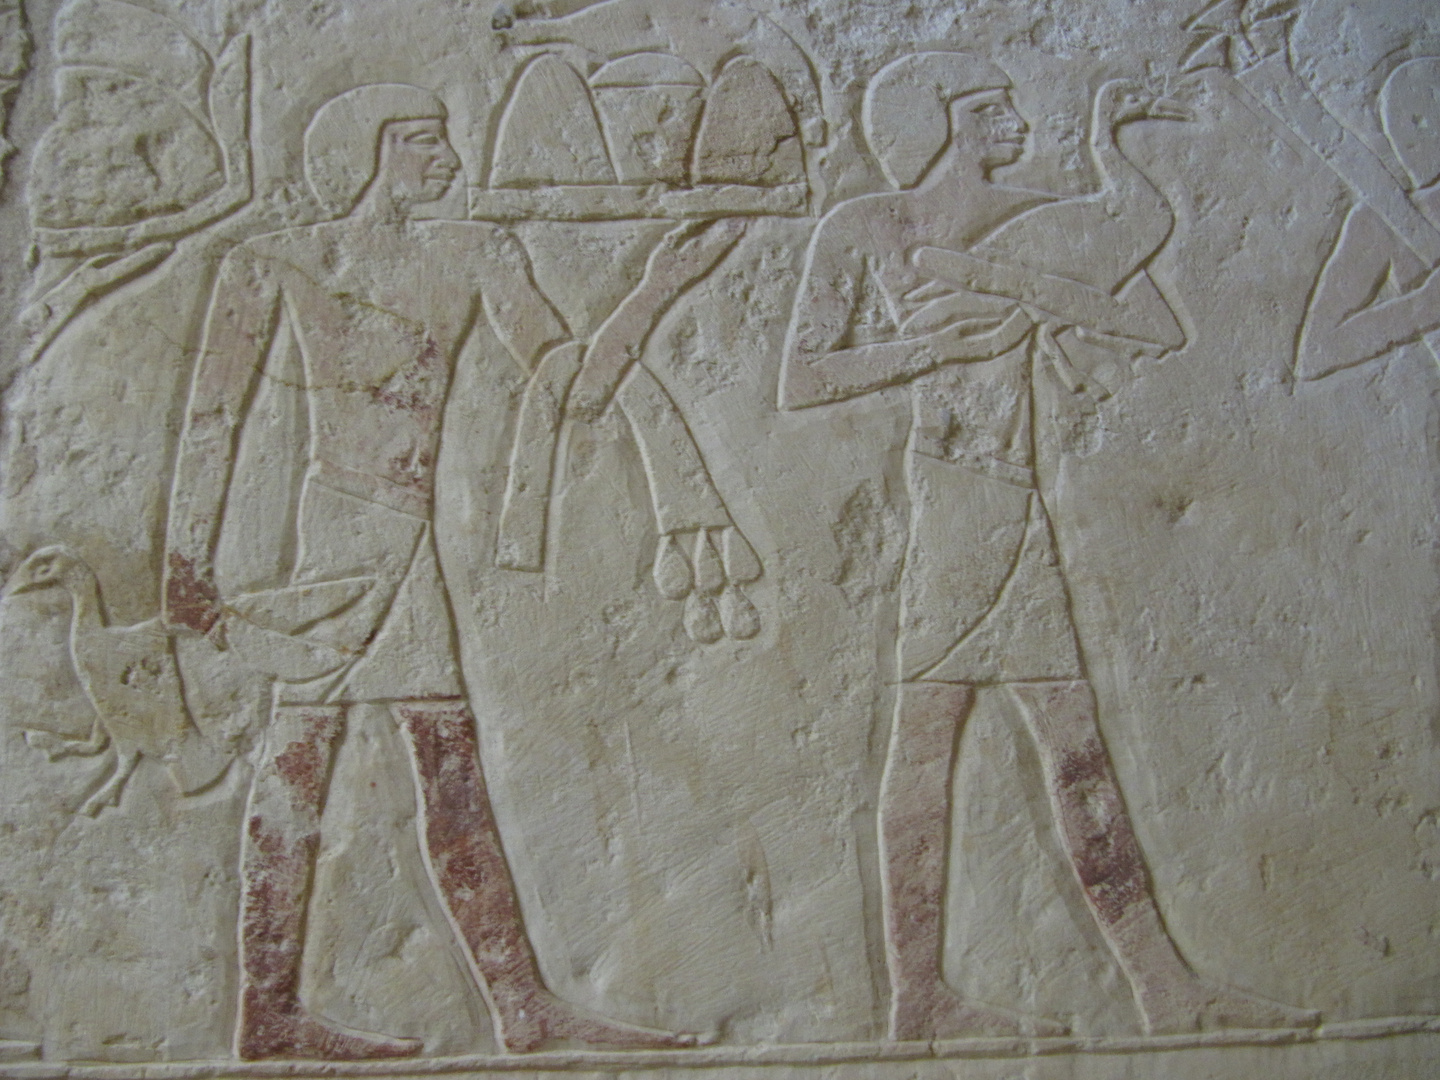 Tomb Offerings